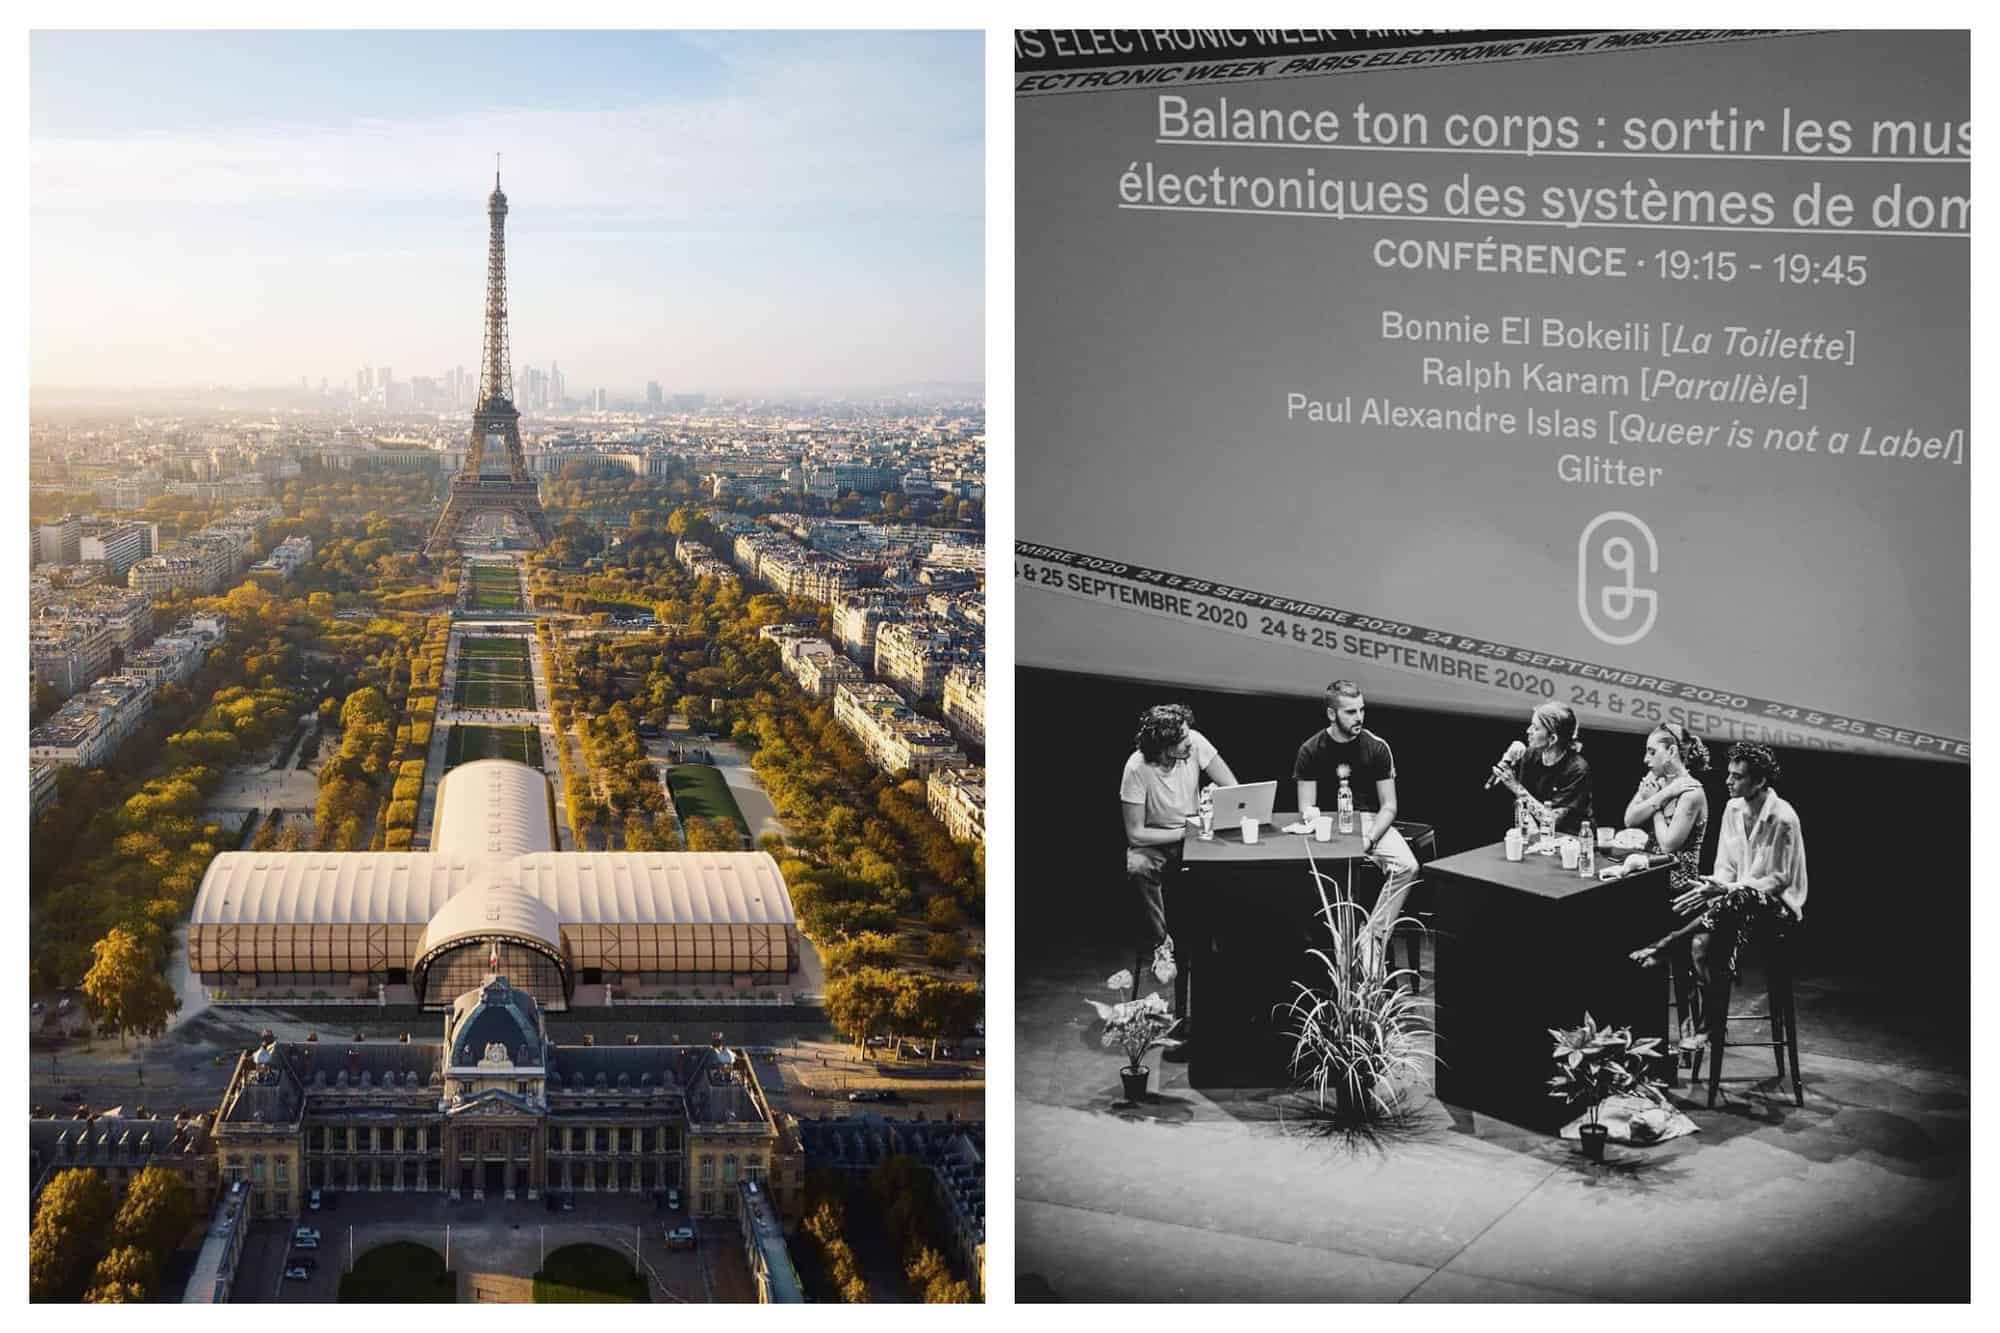 Left: a bird's eye view of the Grand Palais Ephemere with the Eiffel Tower in the background. Right: a black and white image of 5 people sitting around 2 tables on a stage with microphones in front of a screen for Paris Electronic Week.